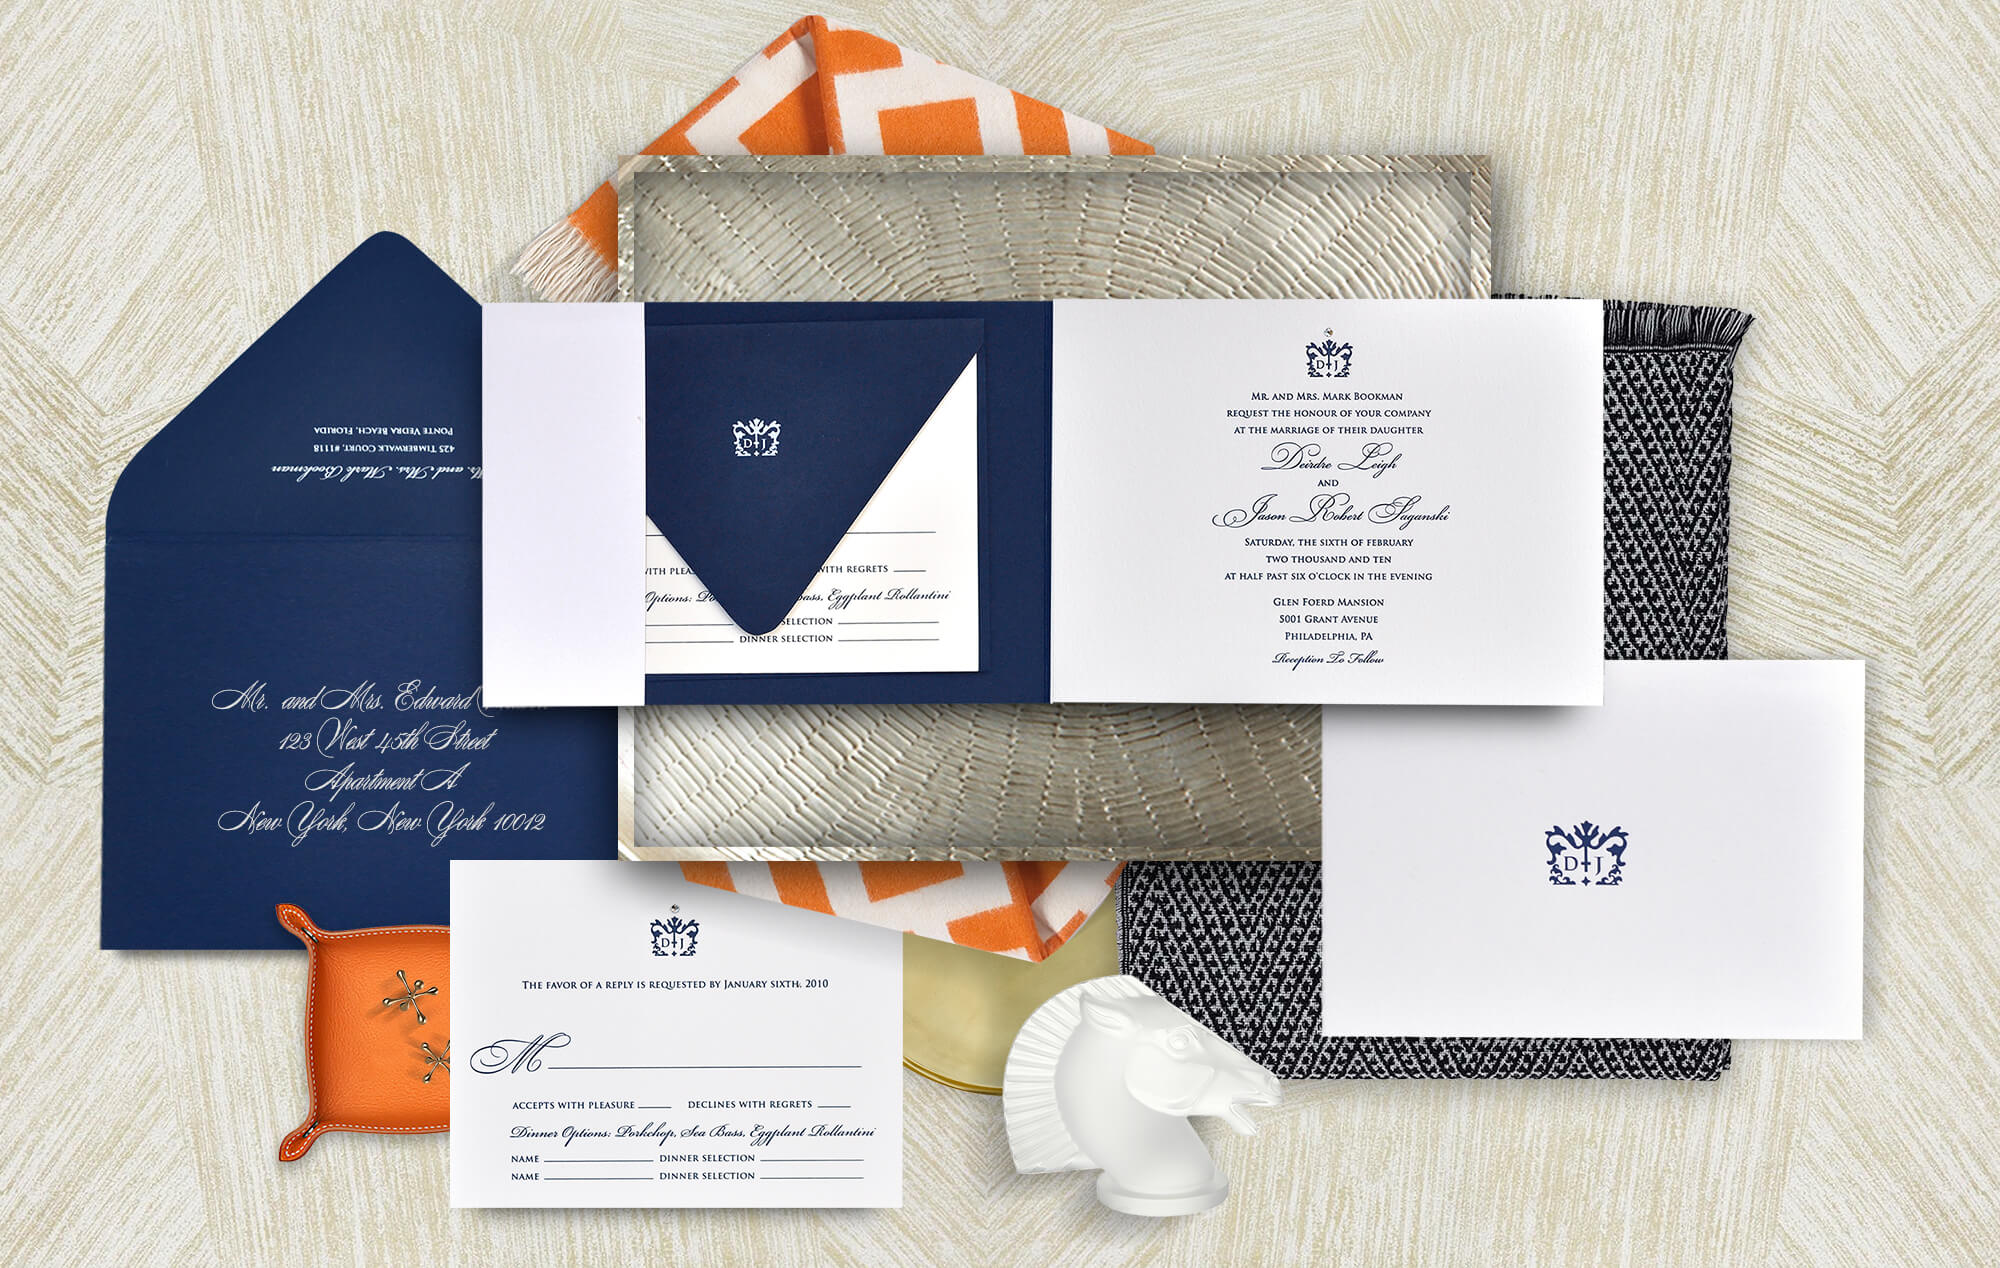 Simple classic navy and white wedding invitation